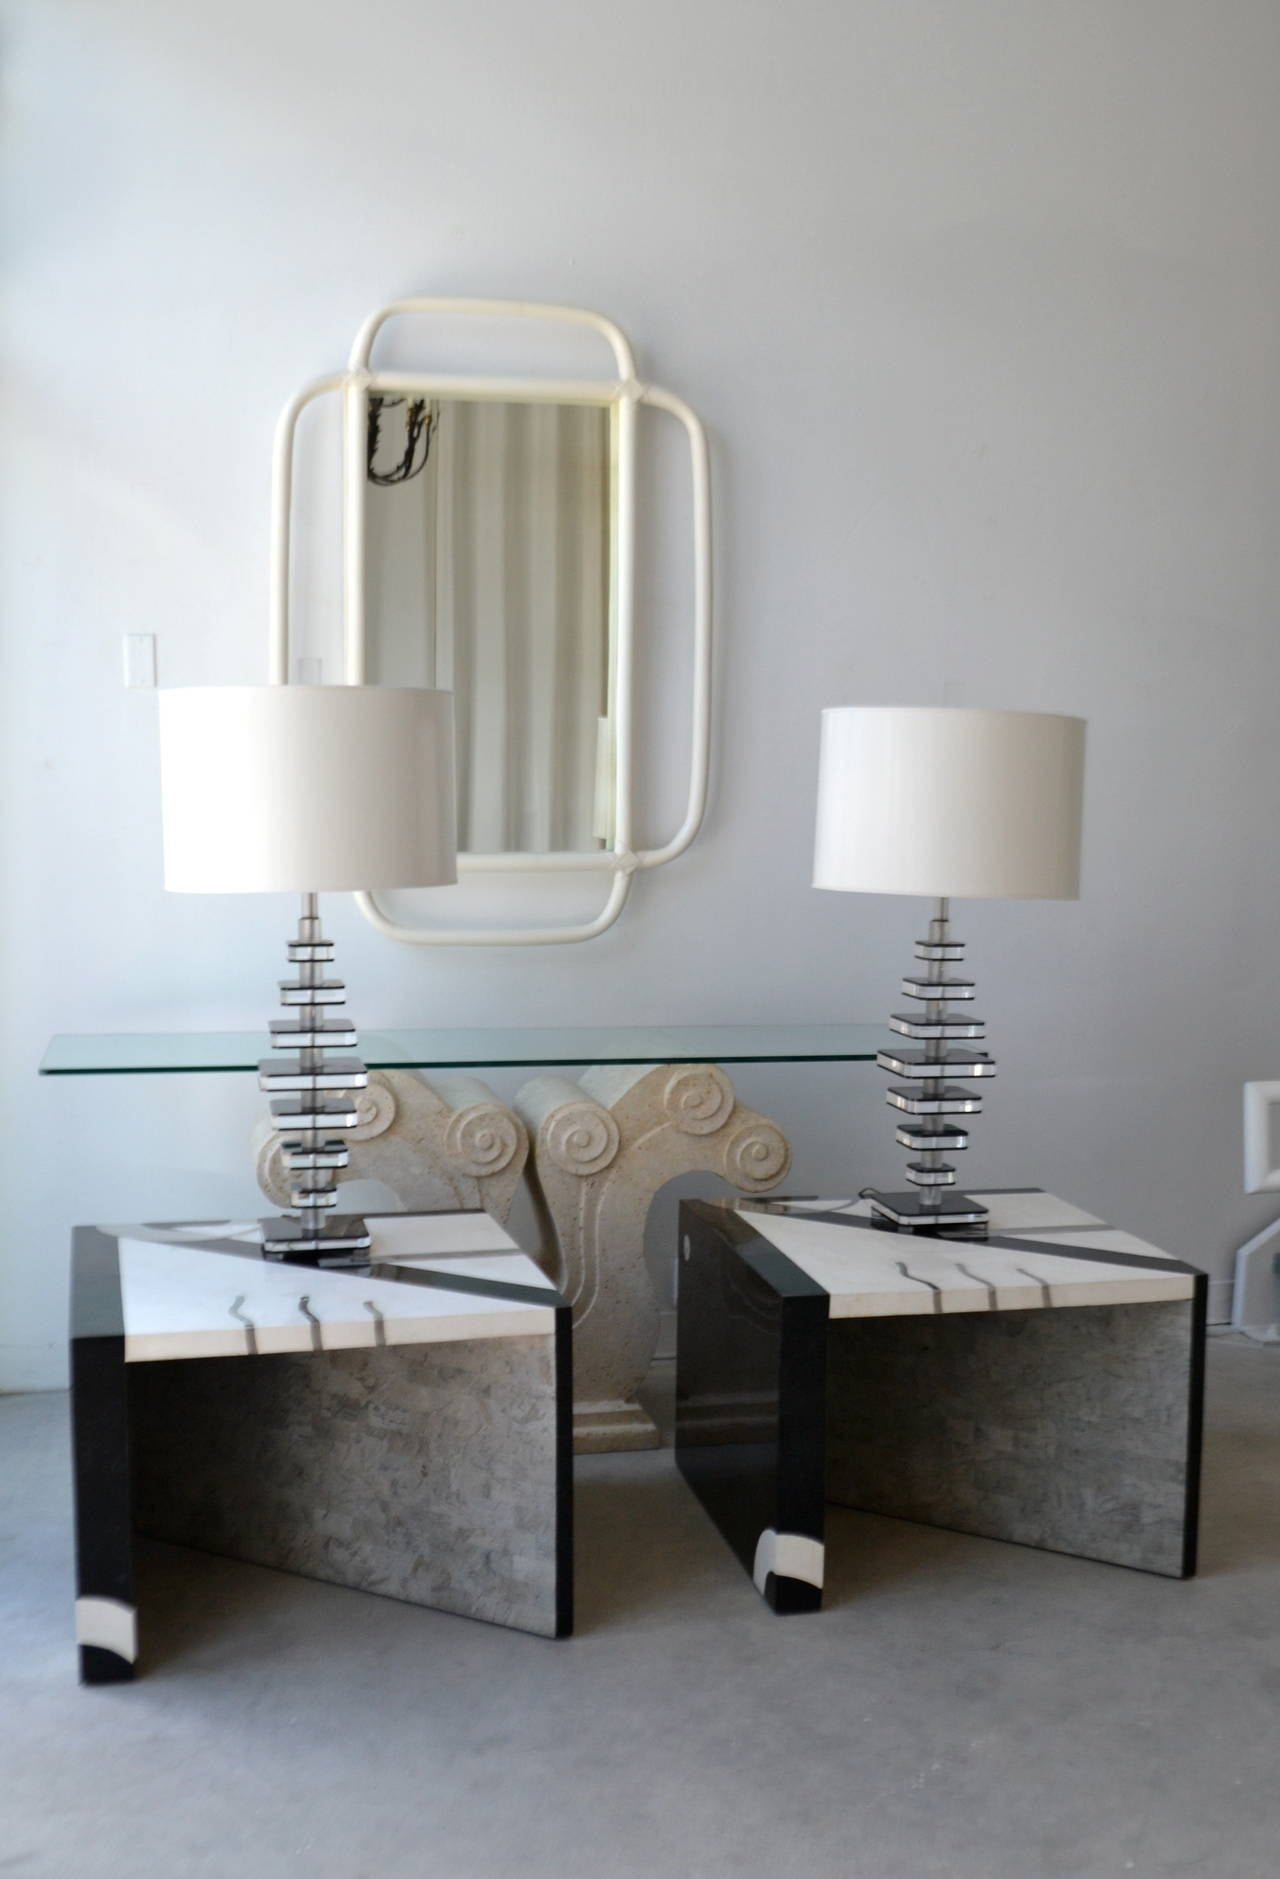 Pair of Postmodern sculptural geometric side tables in tessellated stone with chrome inlays by Oggetti, circa 1980s. These stunning end tables are designed of contrasting tessellated marble in graphic patterns creating a striking Silhouette.